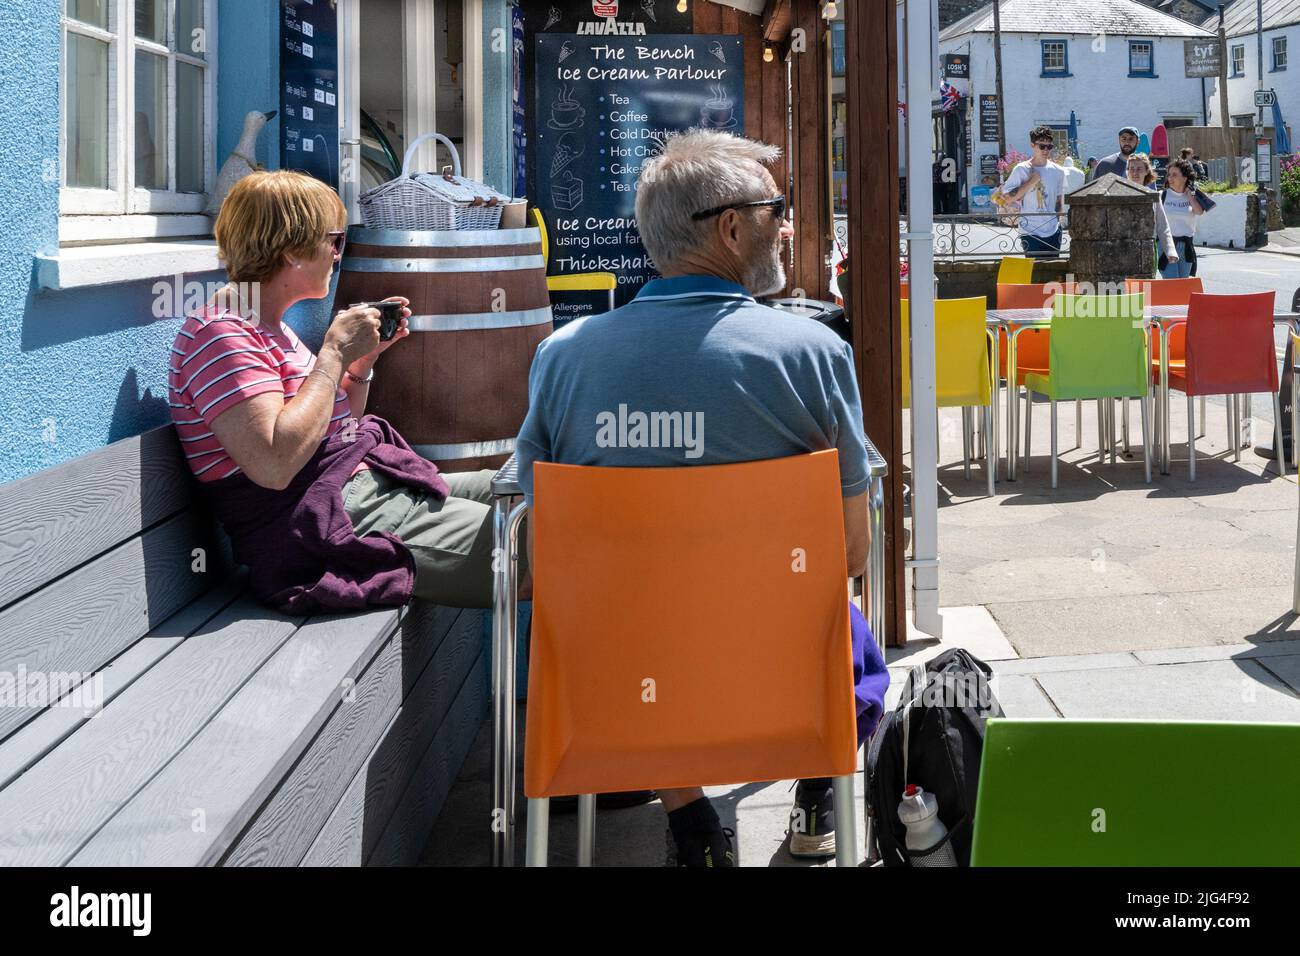 Cafe selling coffee and ice cream in Britain's smallest city, St Davids, Pembrokeshire, Wales, UK Stock Photo